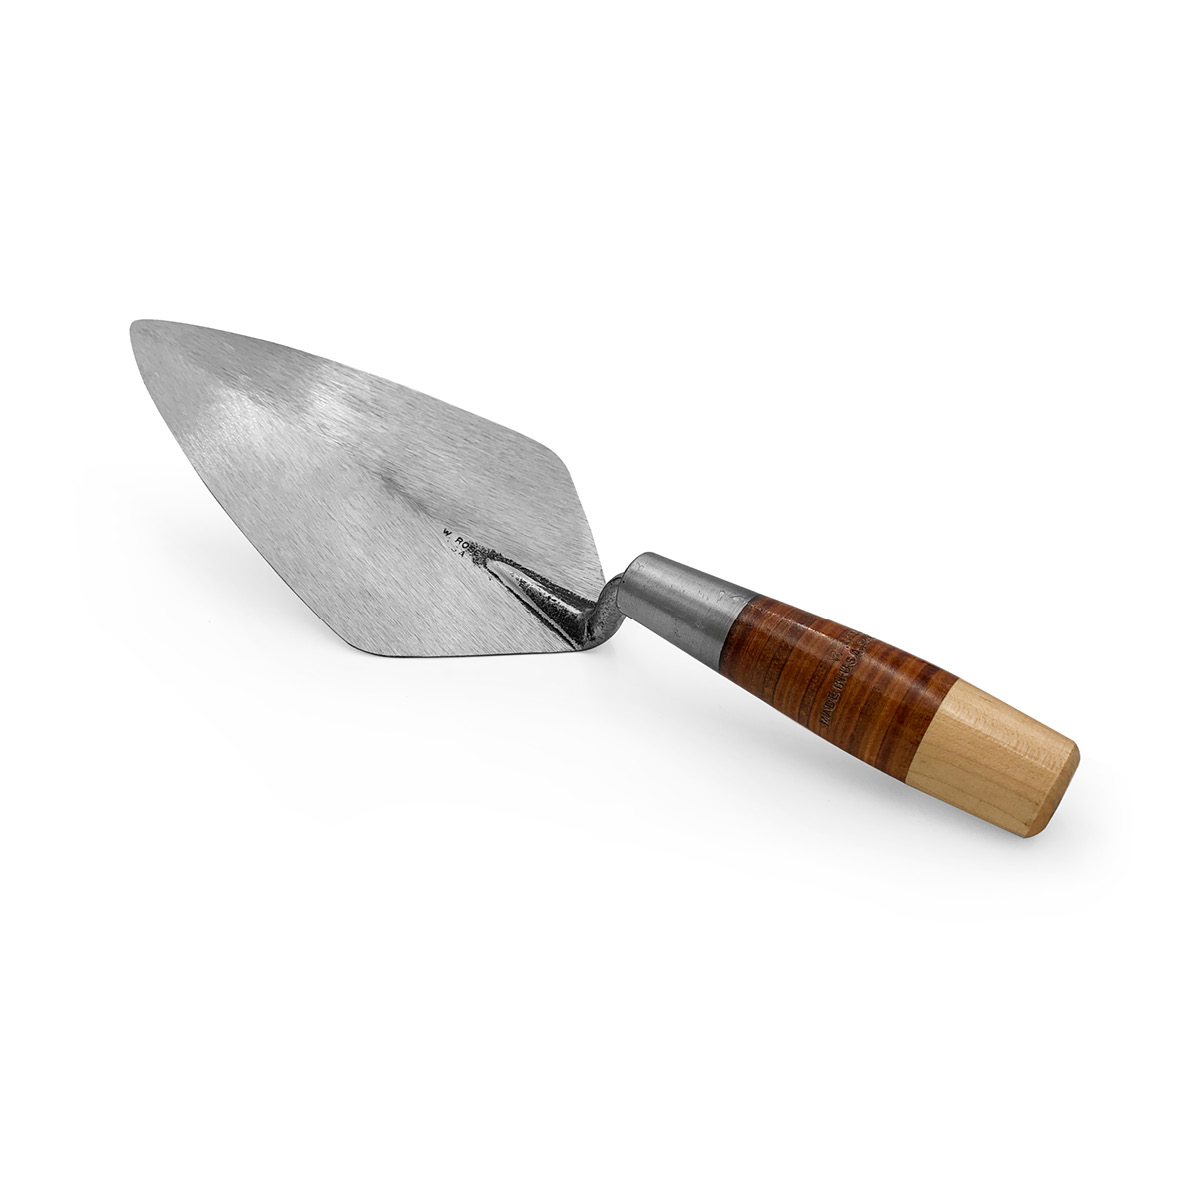 W.rose brick trowel from Speedcrete, United Kingdom. Leather handle and available in various sizes.